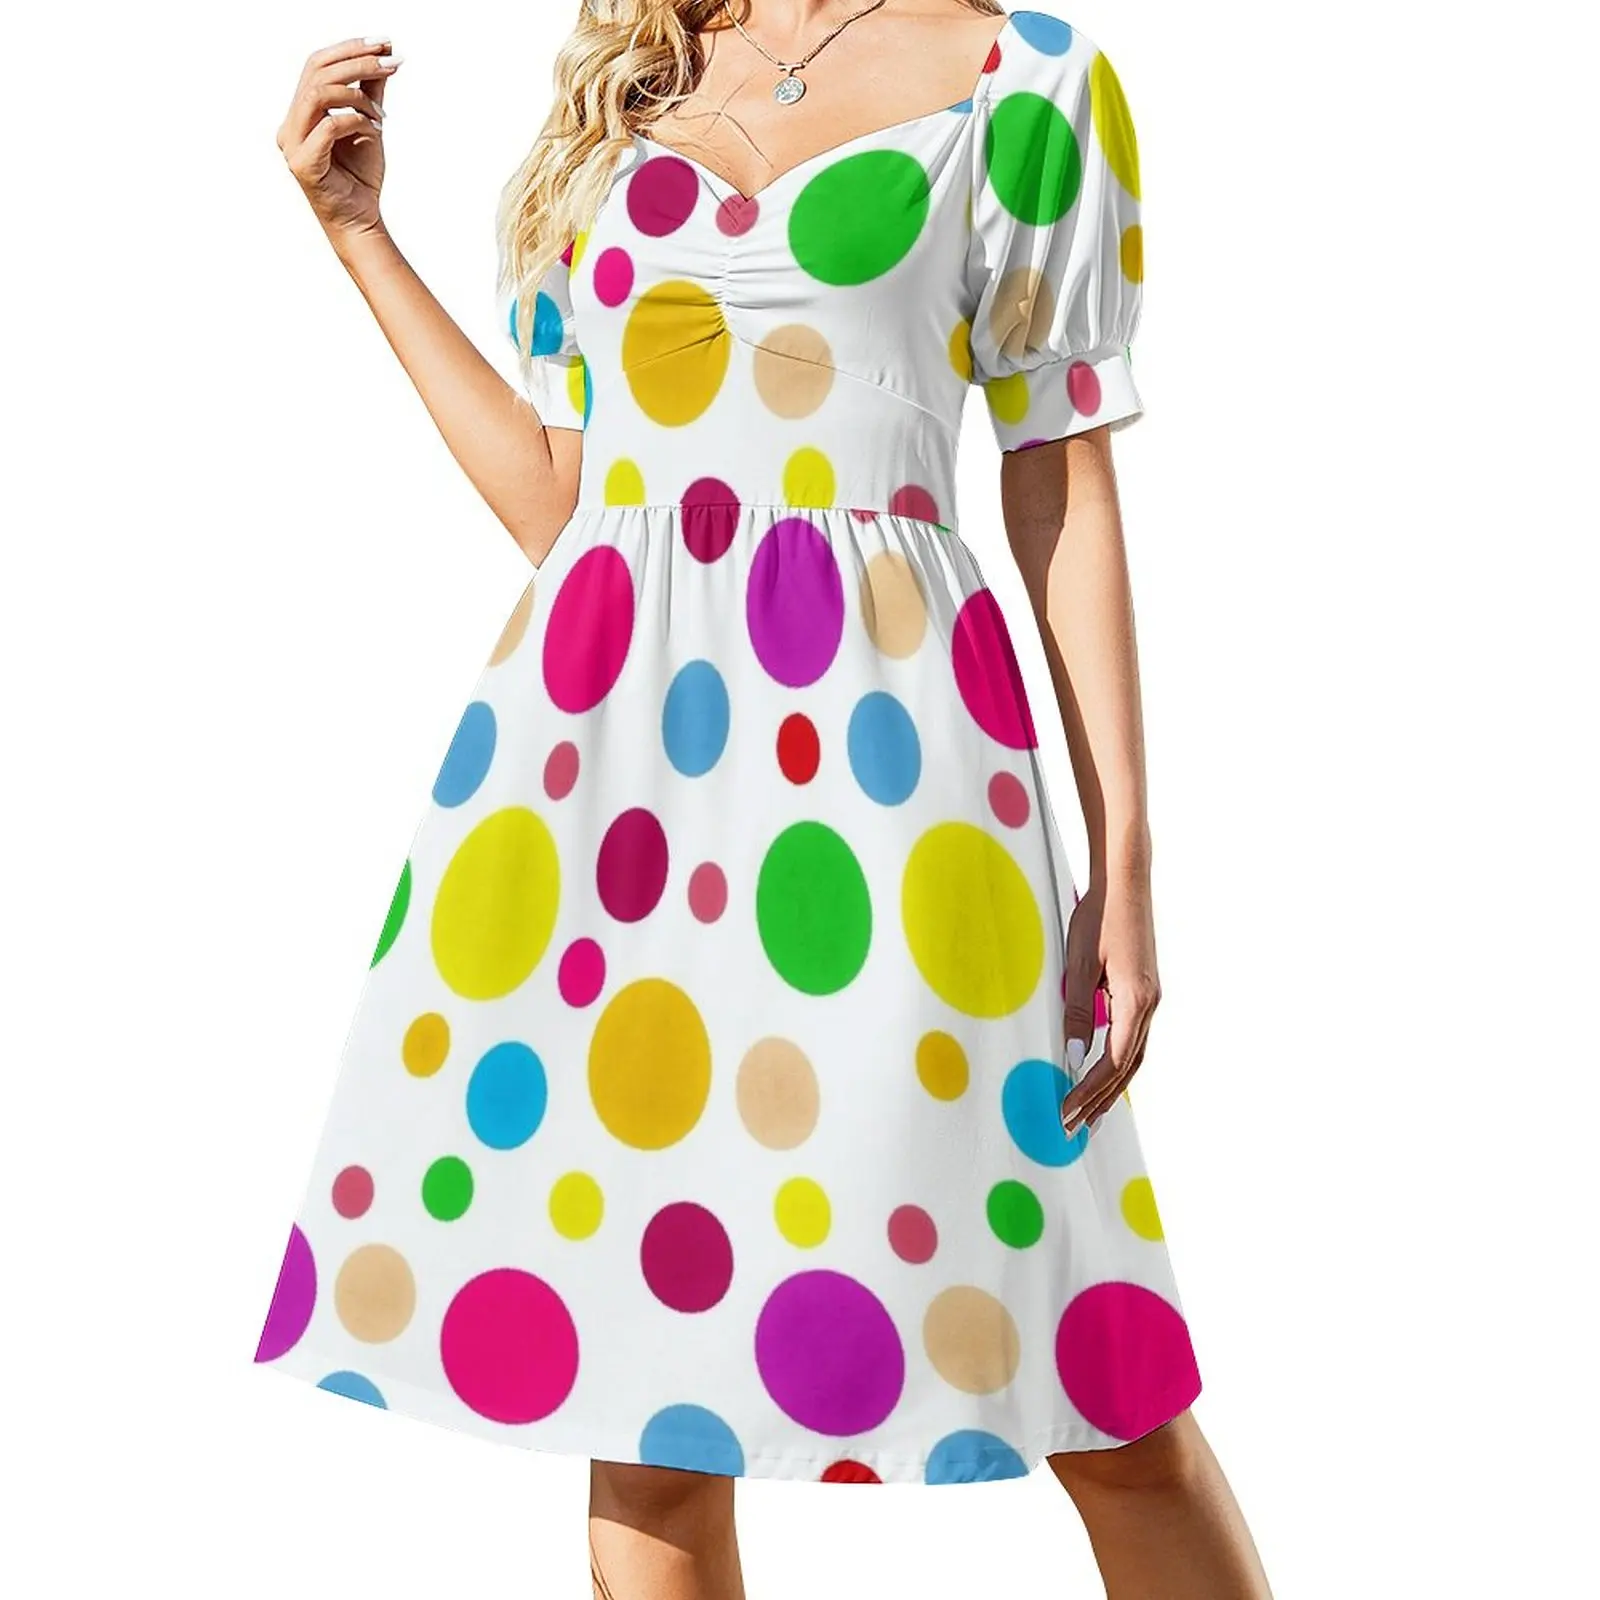 

Colorful Polka Dots Sleeveless Dress birthday dress chic and elegant woman dress women evening summer clothes for women